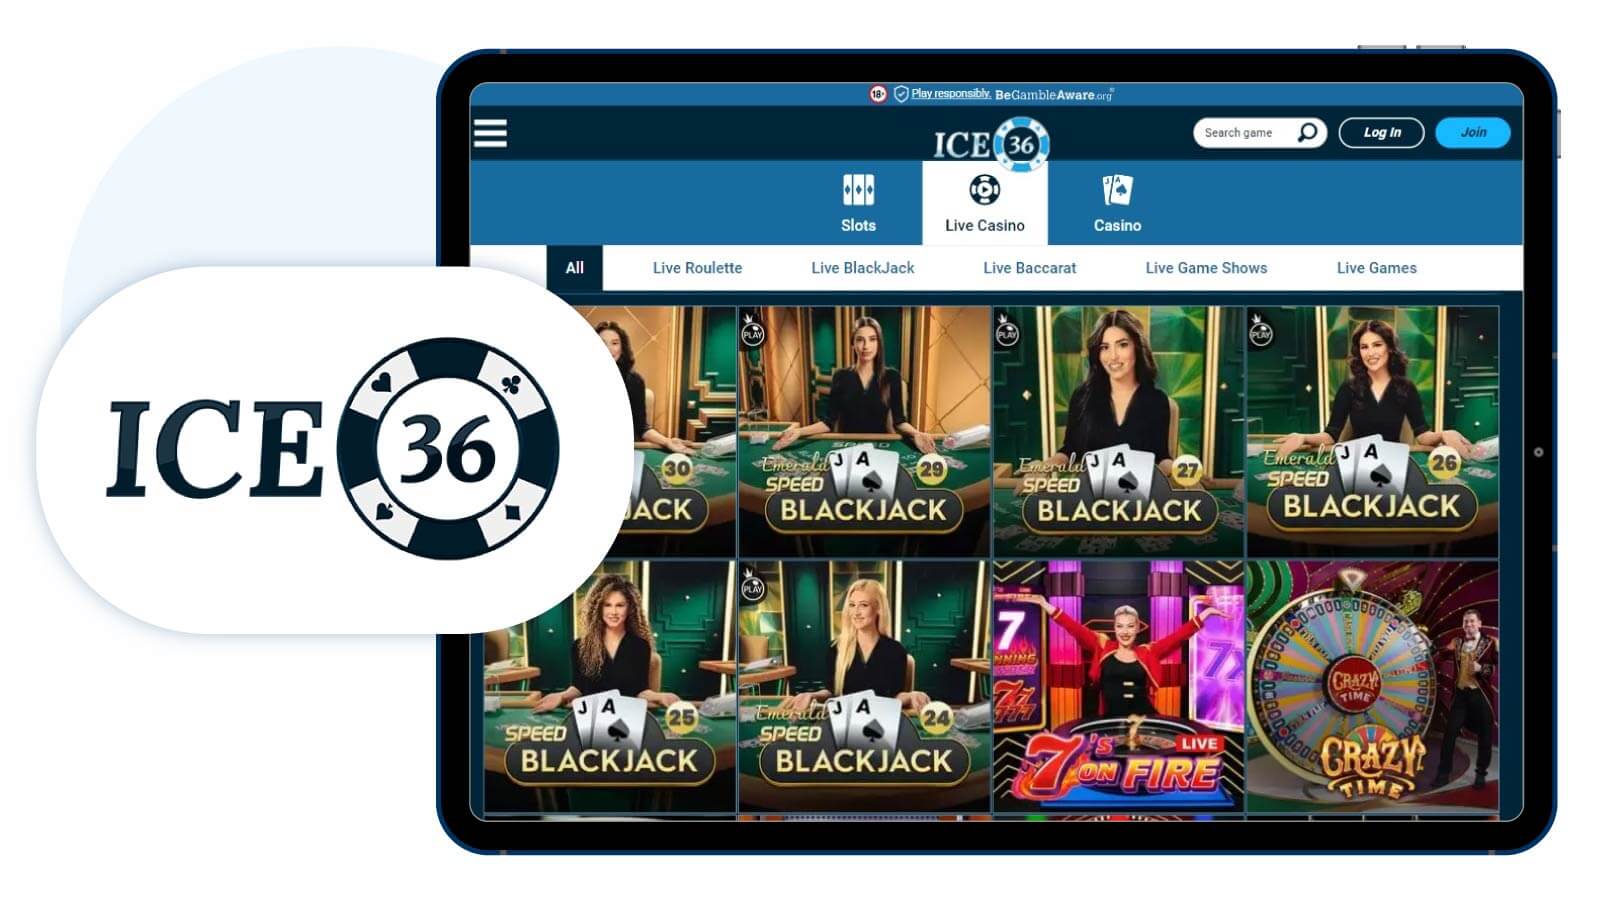 Ice36-Casino-Top-loyalty-program-for-live-casino-players